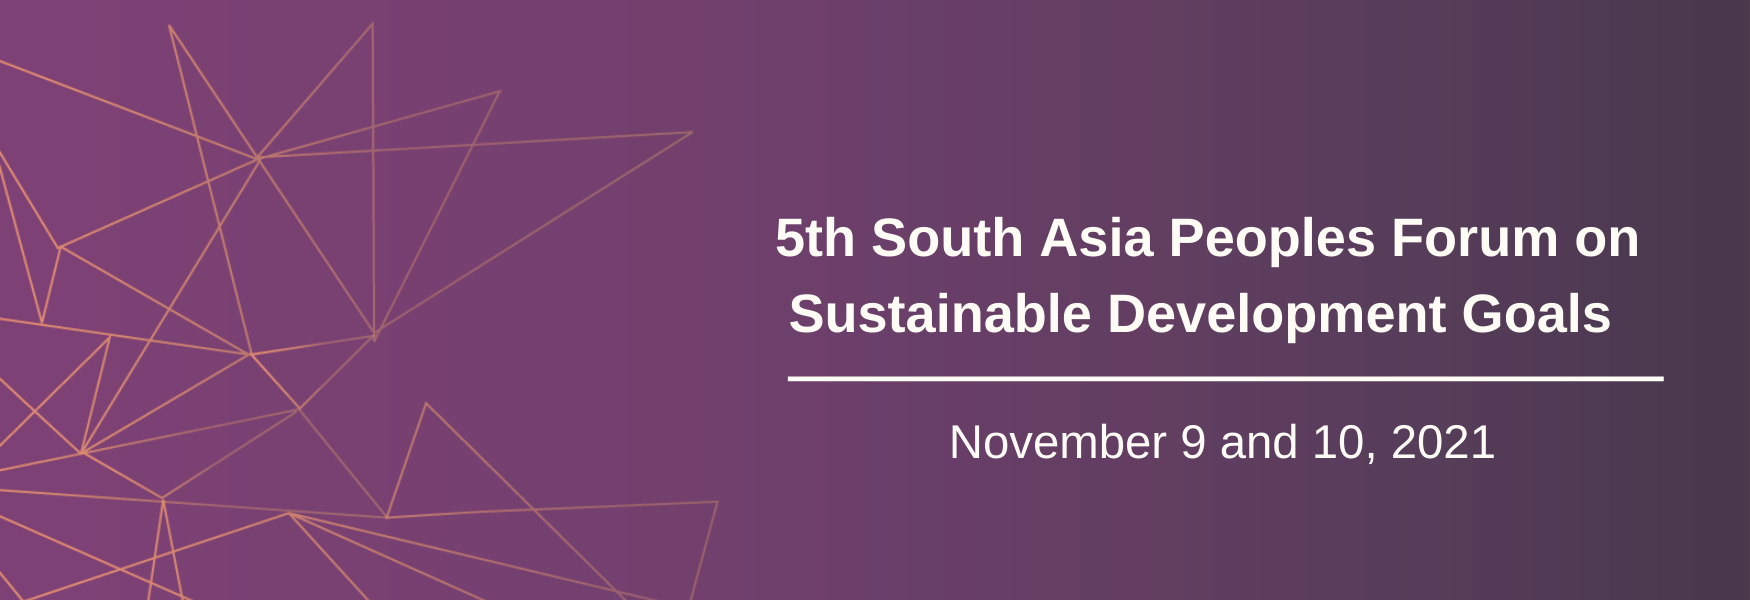 5th South Asia Peoples Forum on Sustainable Development Goals 